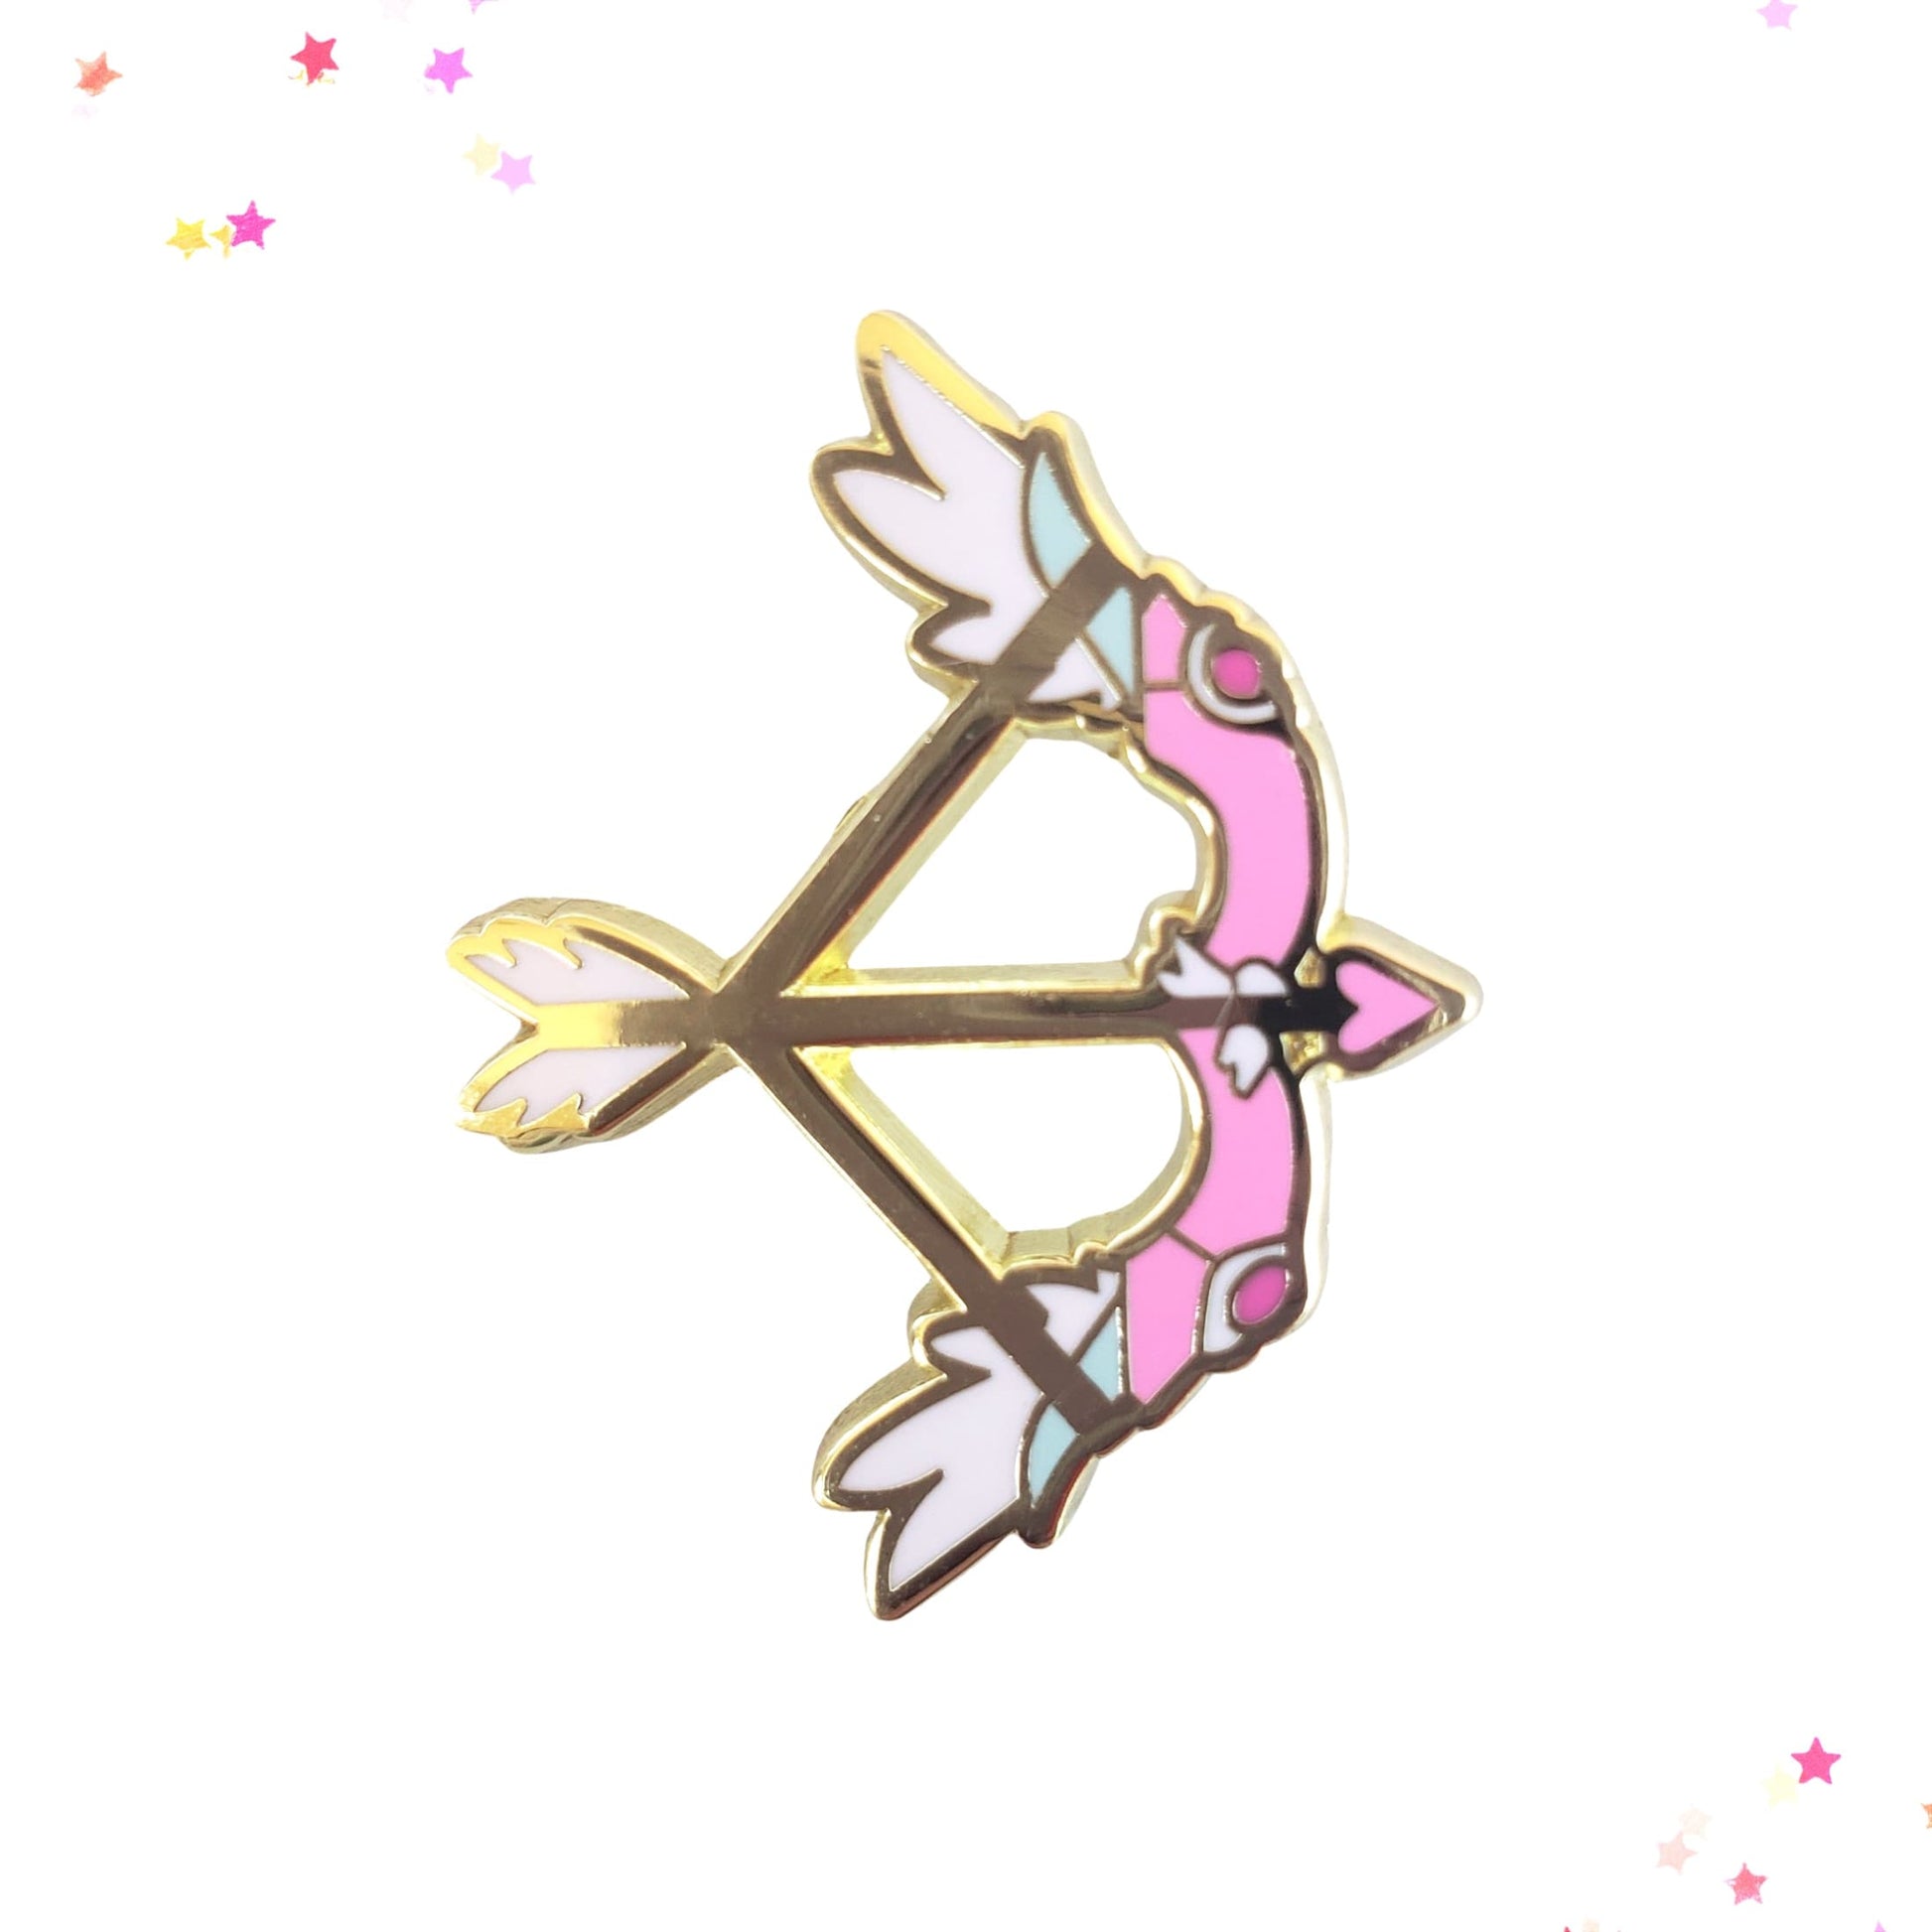 Feathered Bow & Arrow Hard Enamel Pin from Confetti Kitty, Only 7.99